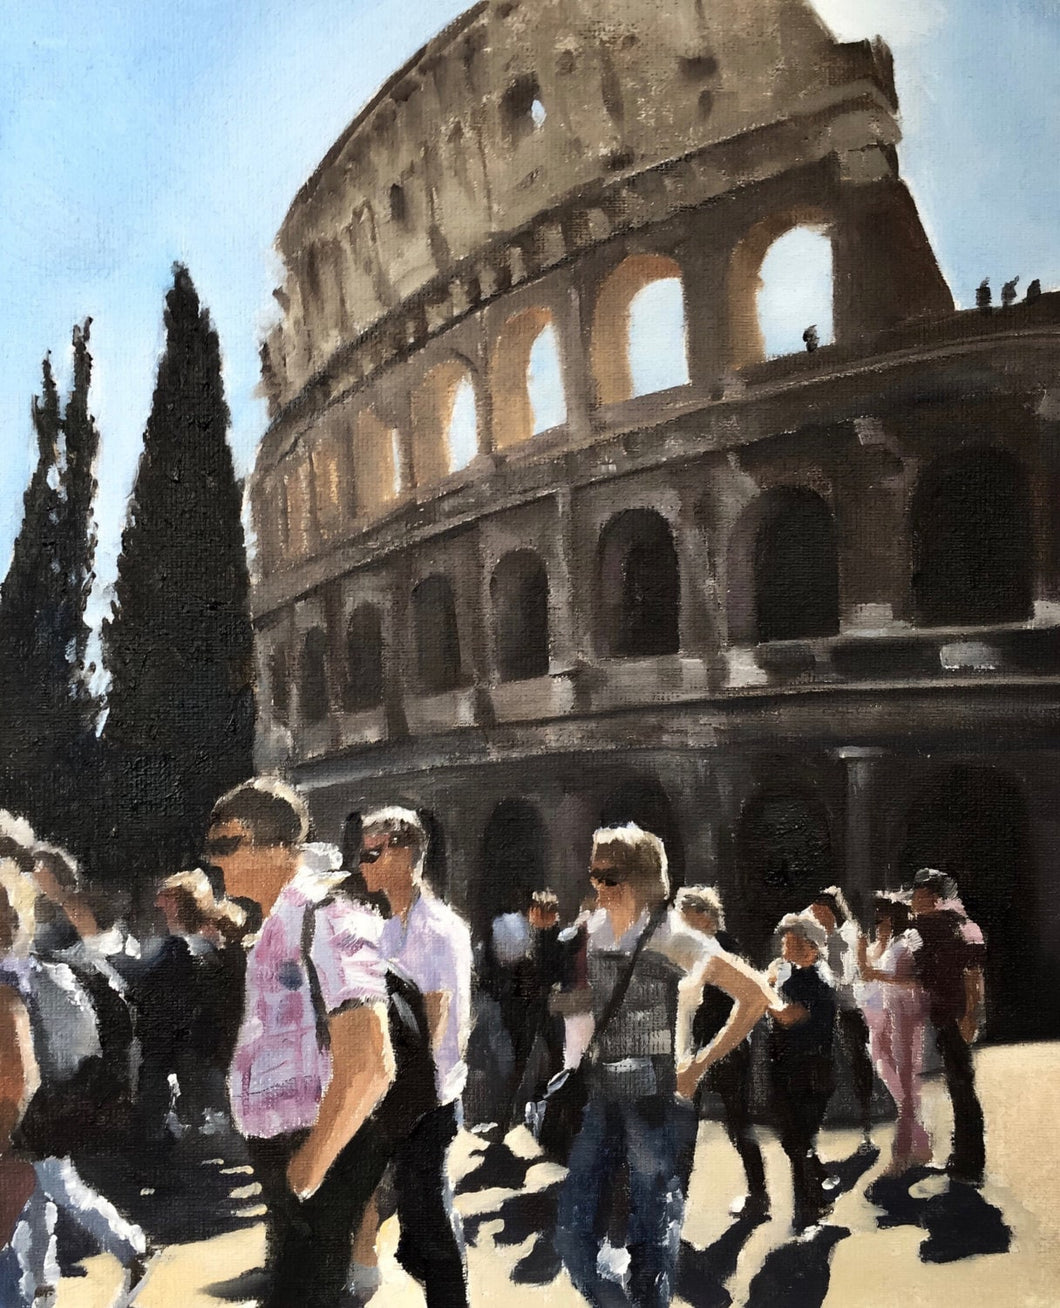 Colosseum Painting, Prints, Canvas, Posters, Originals, Commissions,  Fine Art - from original oil painting by James Coates